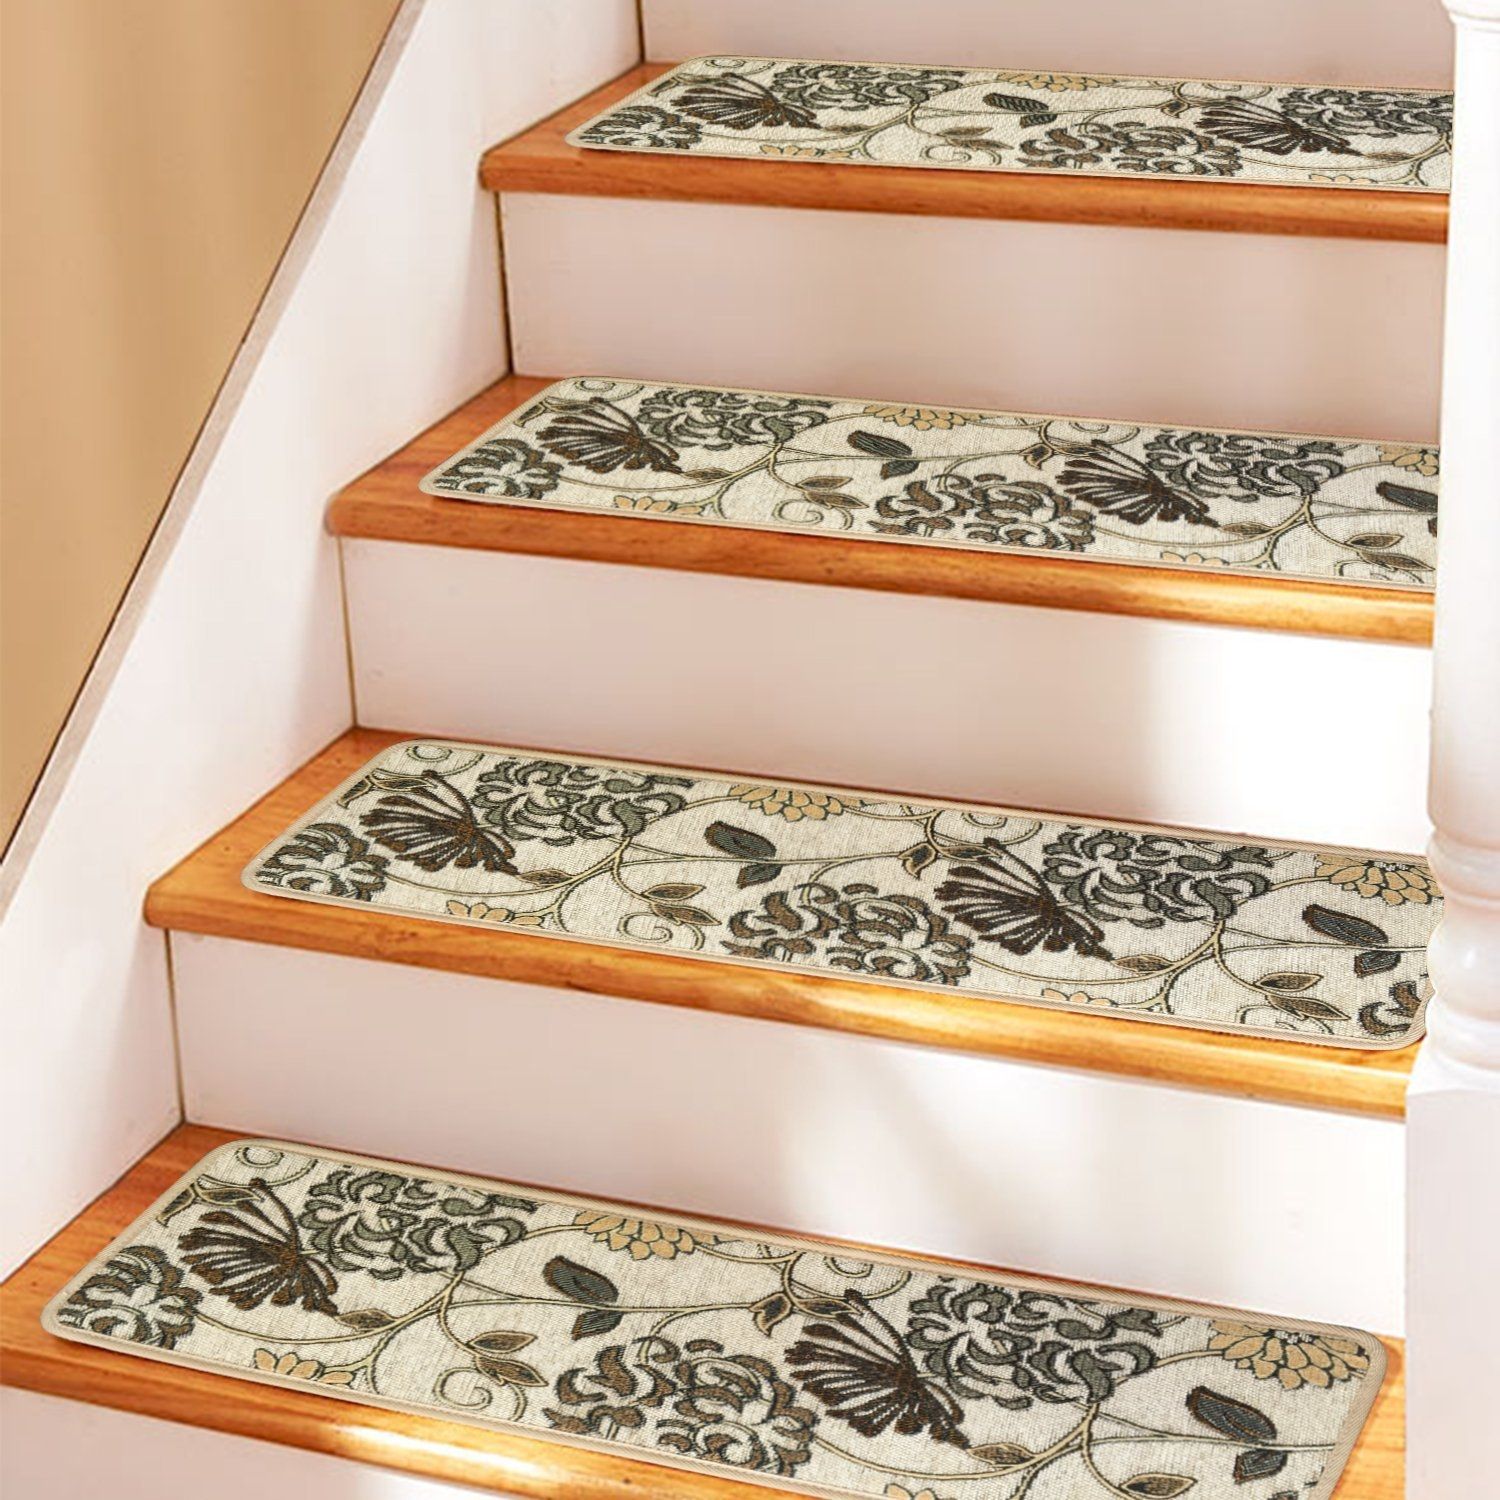 Soloom Carpet Stair Treads Non Slip Set Of 13 Indoor Skid Inside Set Of 13 Stair Tread Rugs (View 10 of 20)